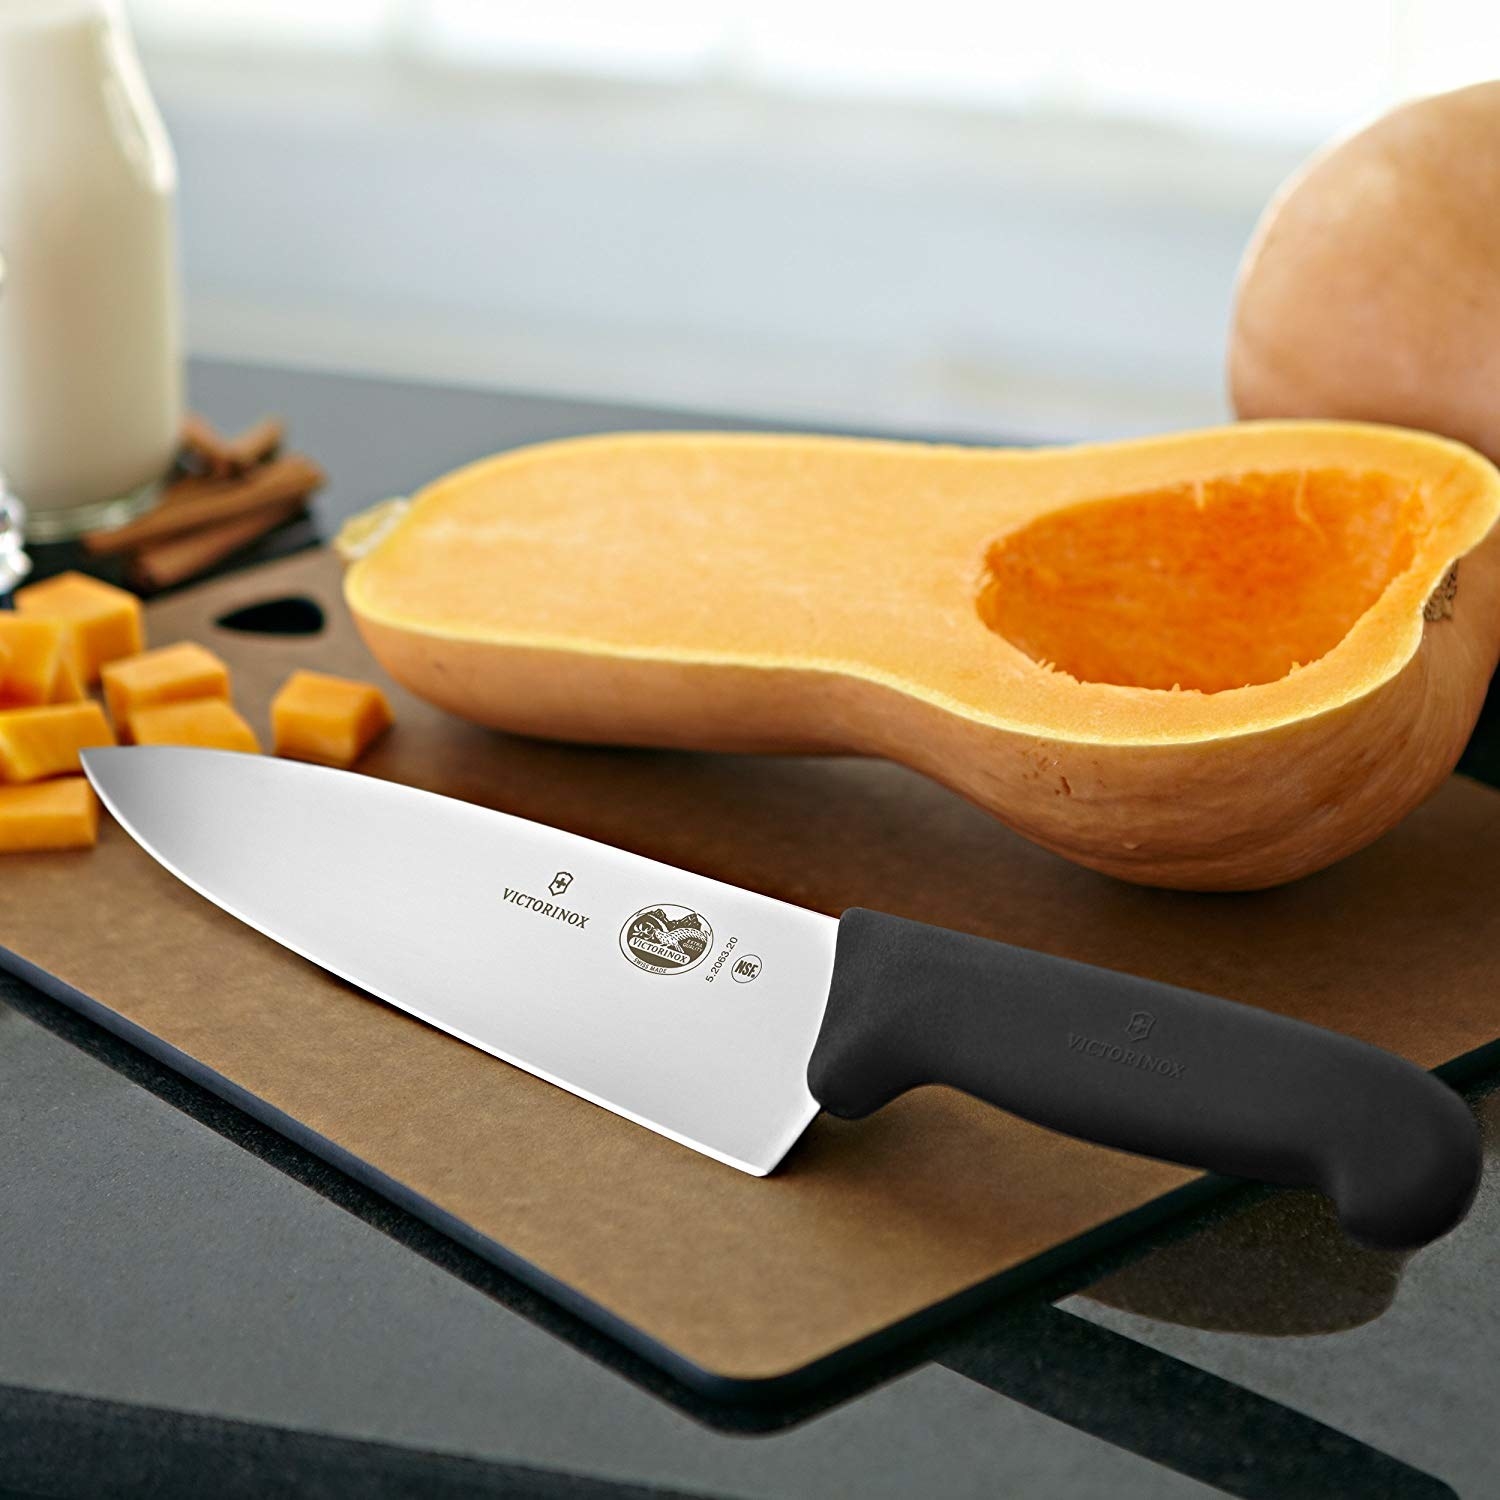 The knife next to a squash